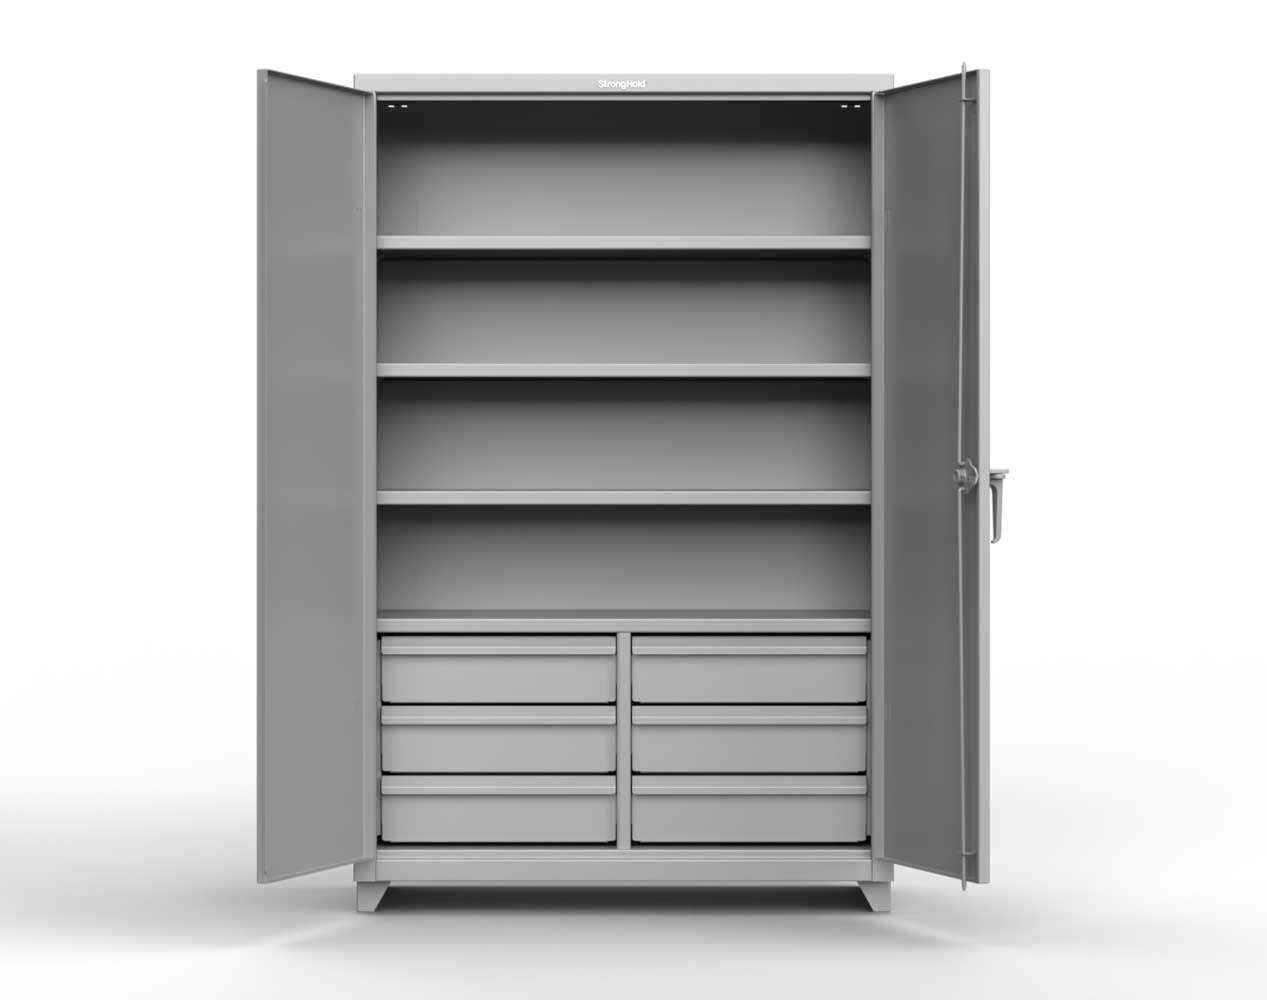 Extra Heavy Duty 14 GA Cabinet with 6 Half-Width Drawers, 4 Shelves - 48 In. W x 24 In. D x 75 In. H